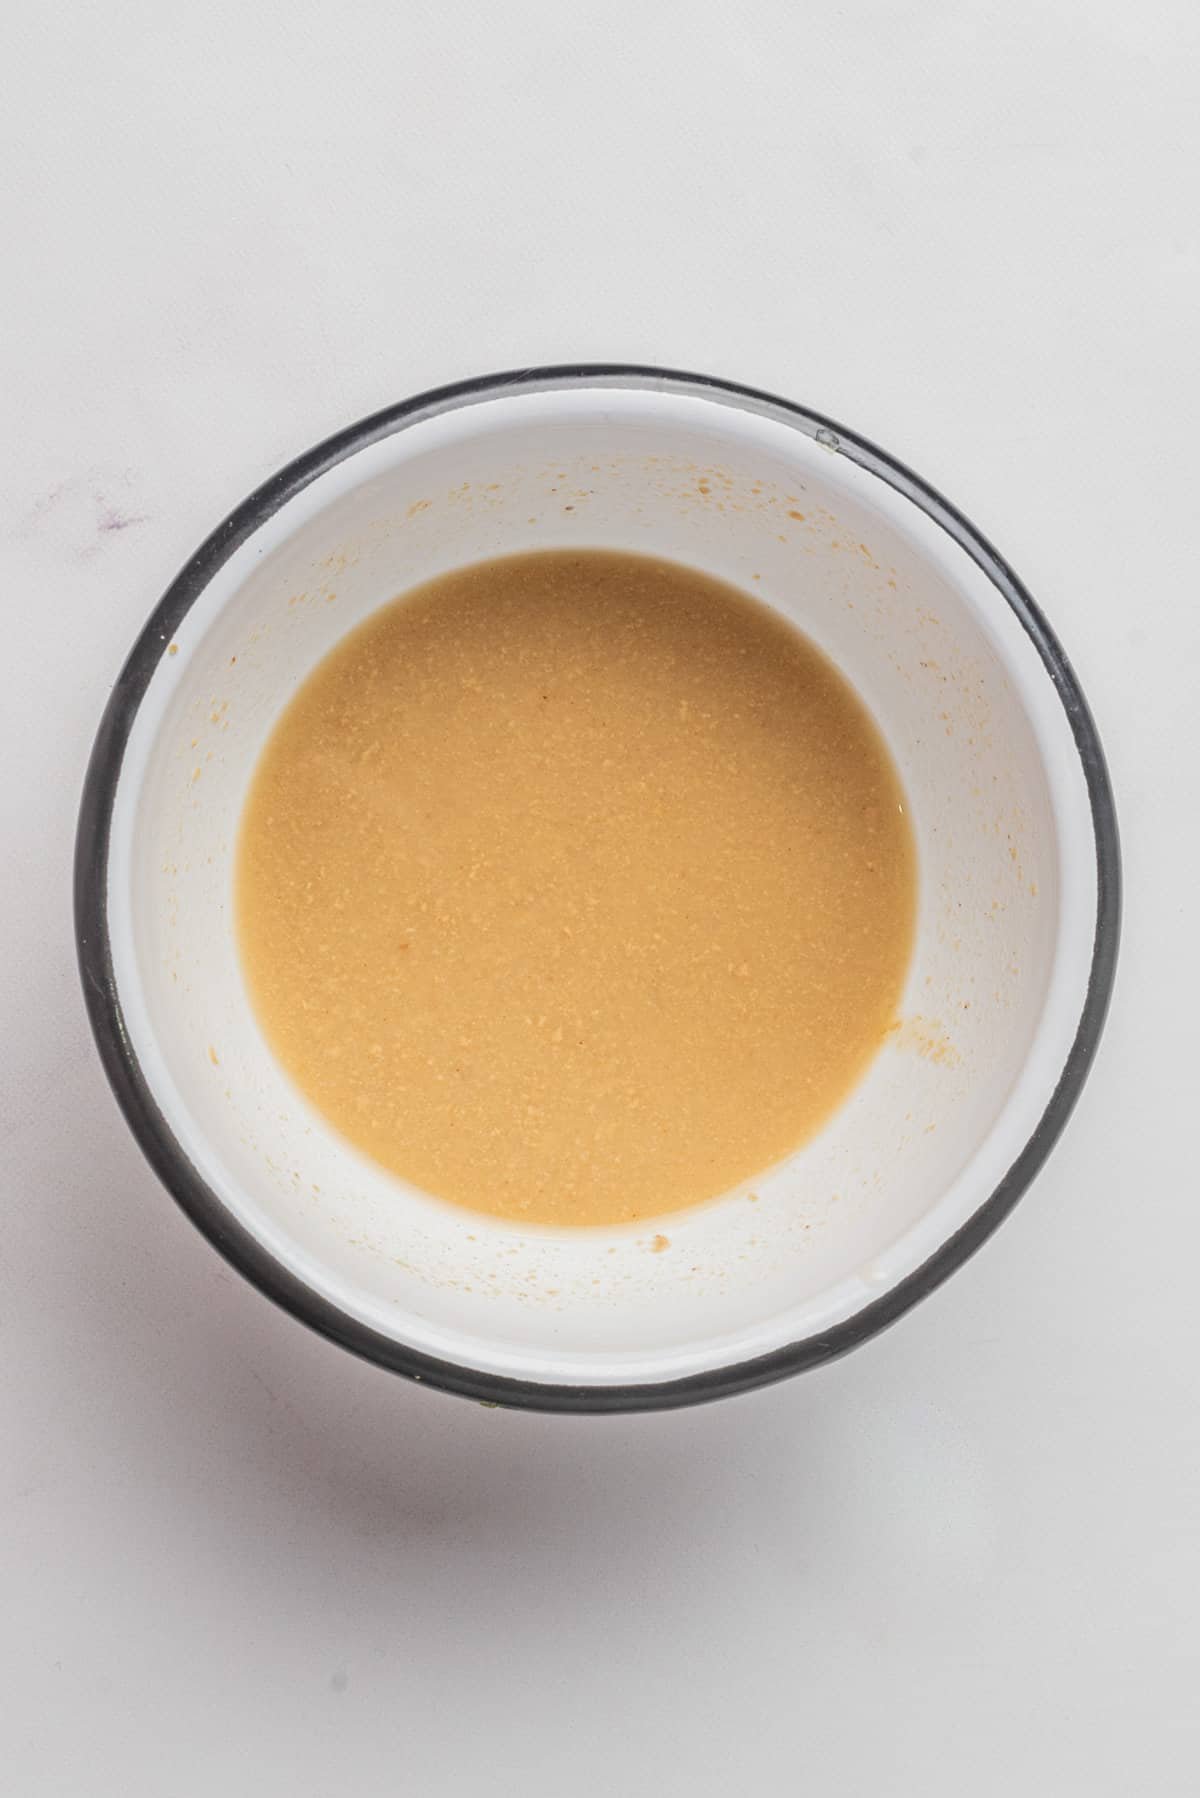 An image of a mixture of champagne vinegar, Dijon mustard, and honey or maple syrup in a small bowl.